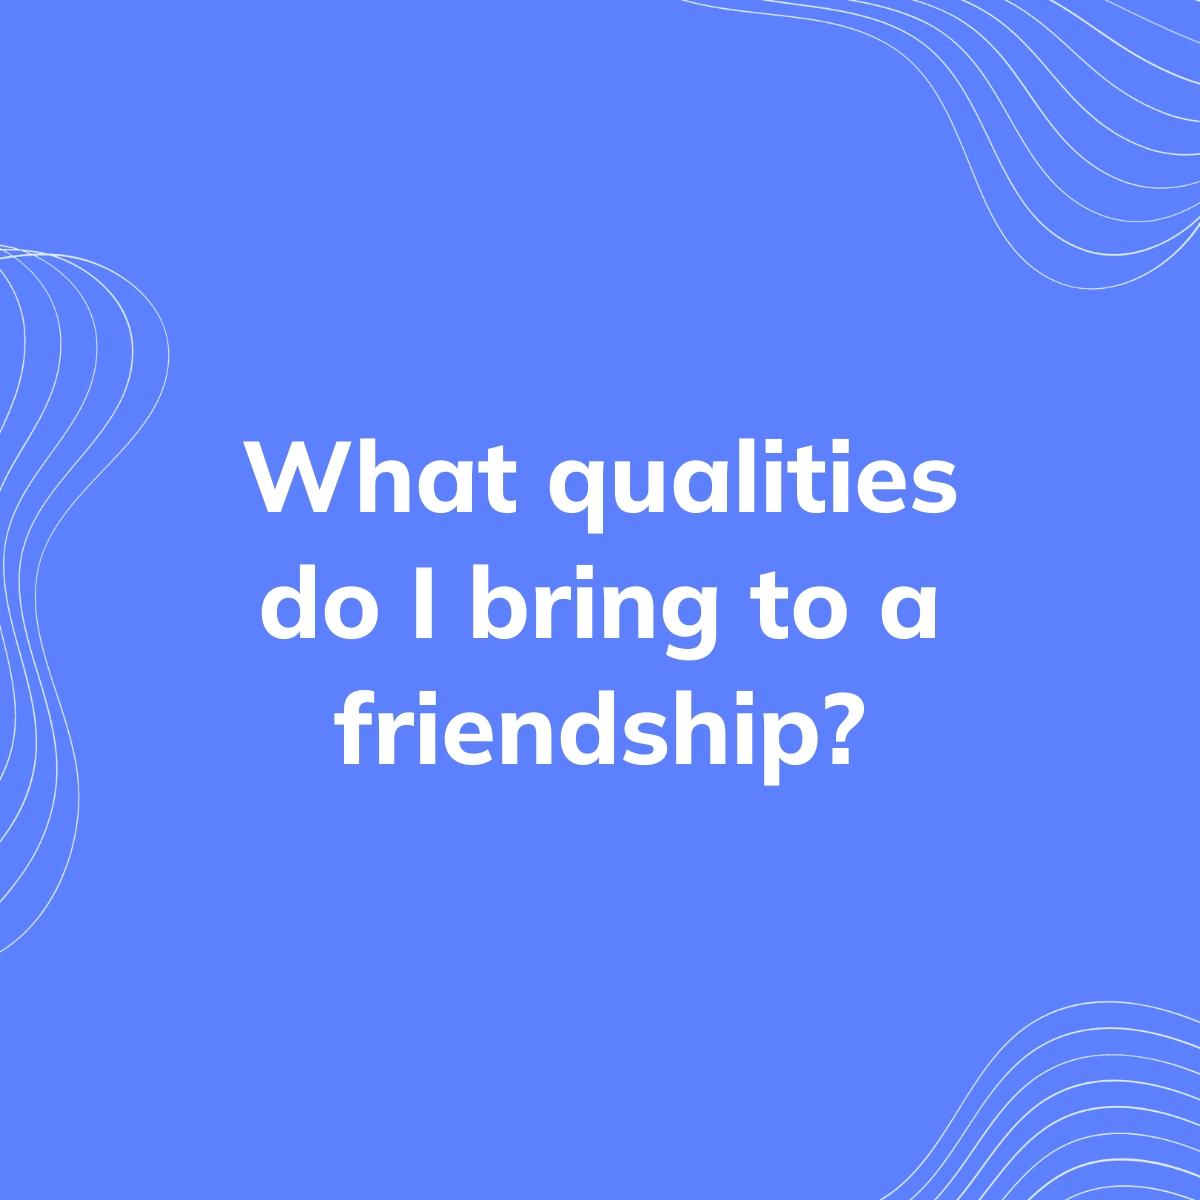 Journal Prompt: What qualities do I bring to a friendship?